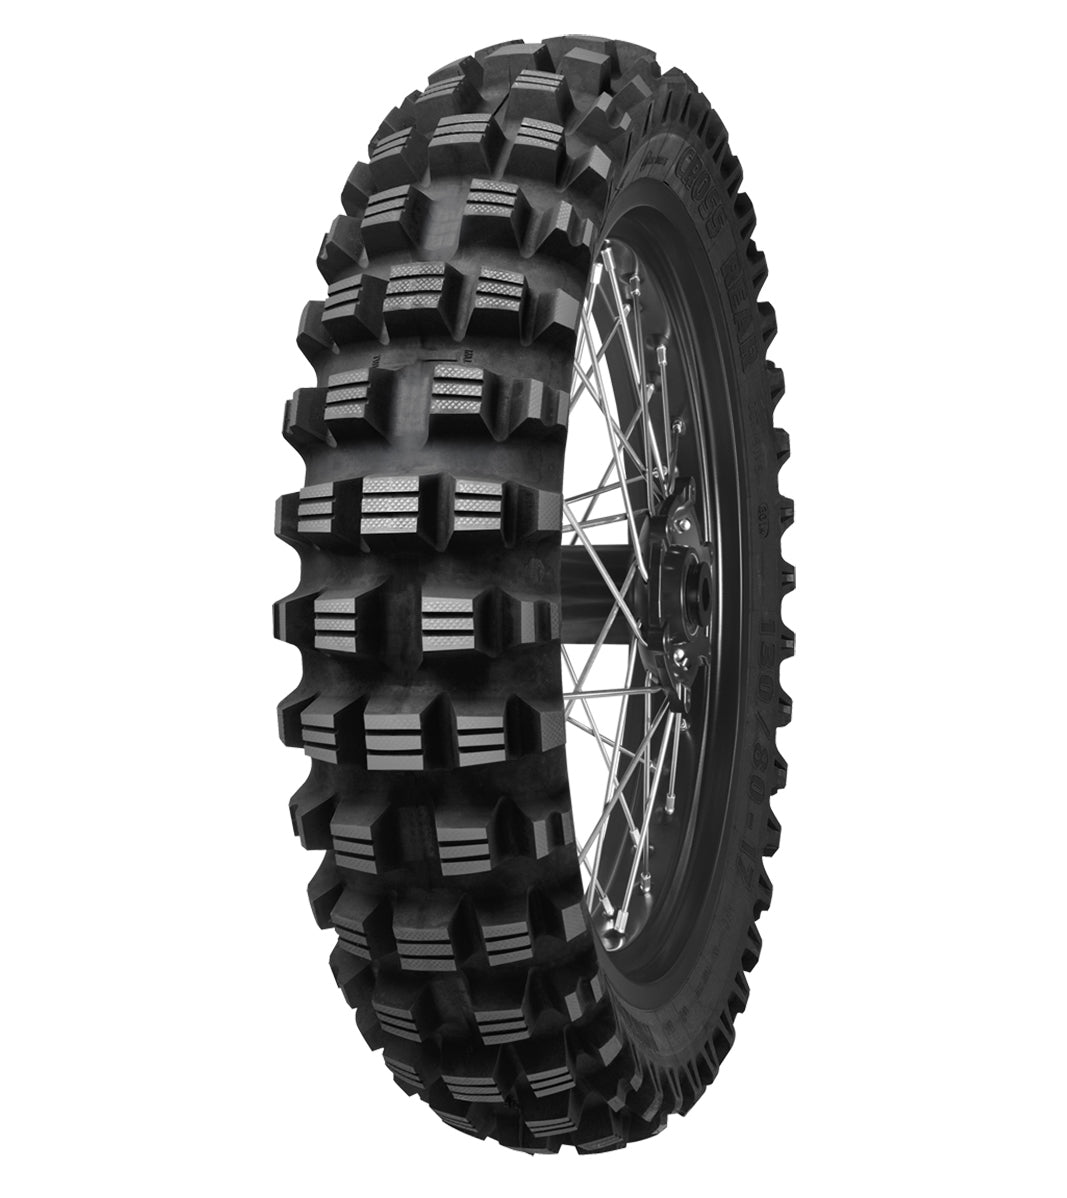 Mitas C-02 STONE KING 120/90-18 All-Terrain Off-Road 71N No Stripe Tube Rear Tire, 226362, 120/90-18, All-Terrain, C-02 Stone King, Off-Road, Rear, Tires - Imported and distributed in North & South America by Lindeco Genuine Powersports - Premier Powersports Equipment and Accessories for Motorcycle Enthusiasts, Professional Riders and Dealers.